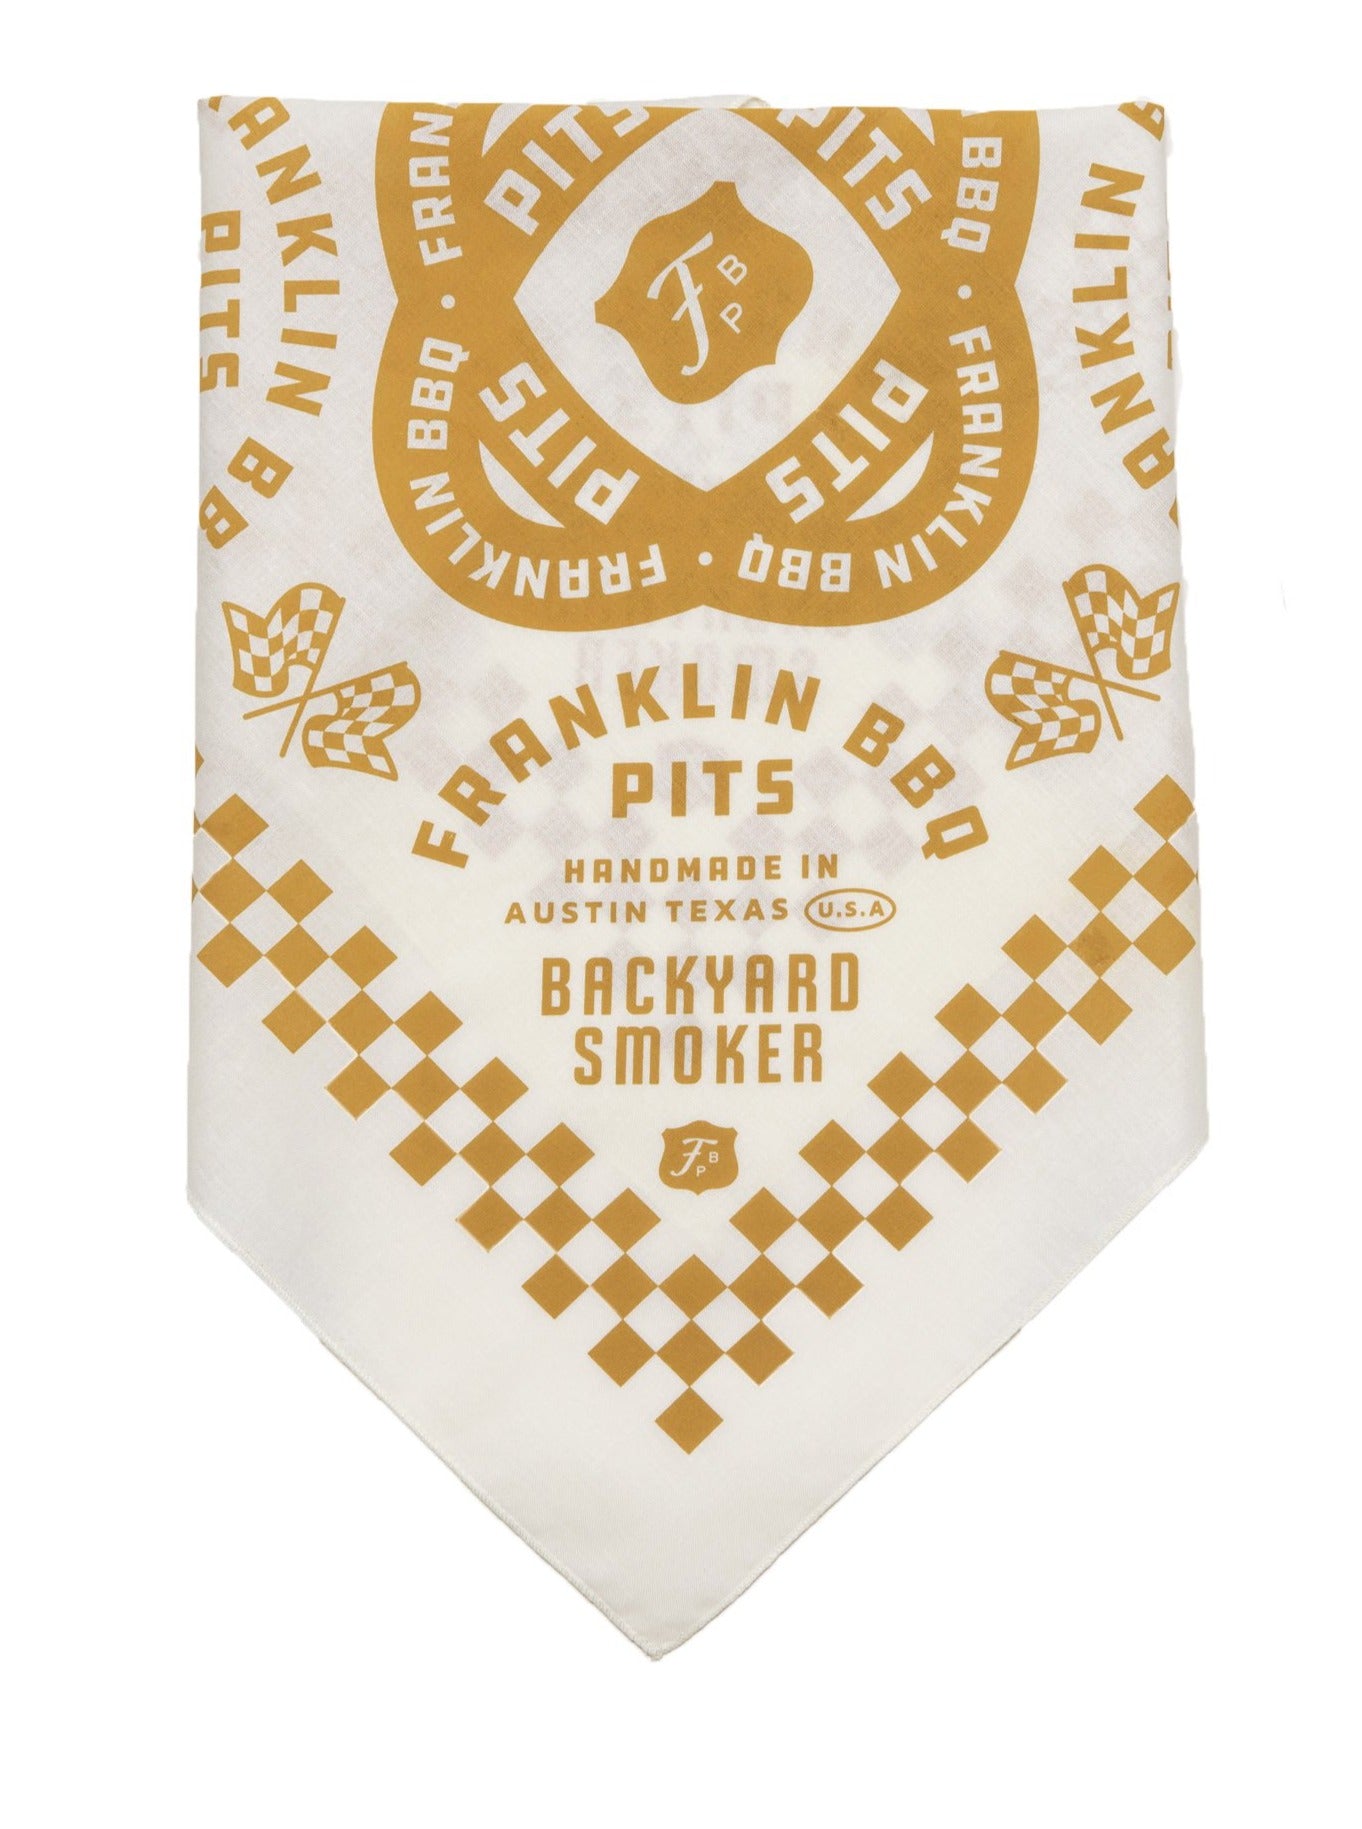 Folded display of tan Franklin BBQ Pits bandana to show detail of patterned design which includes a checkered border and text logos saying "Handmade in Austin Texas, Backyard Smoker"